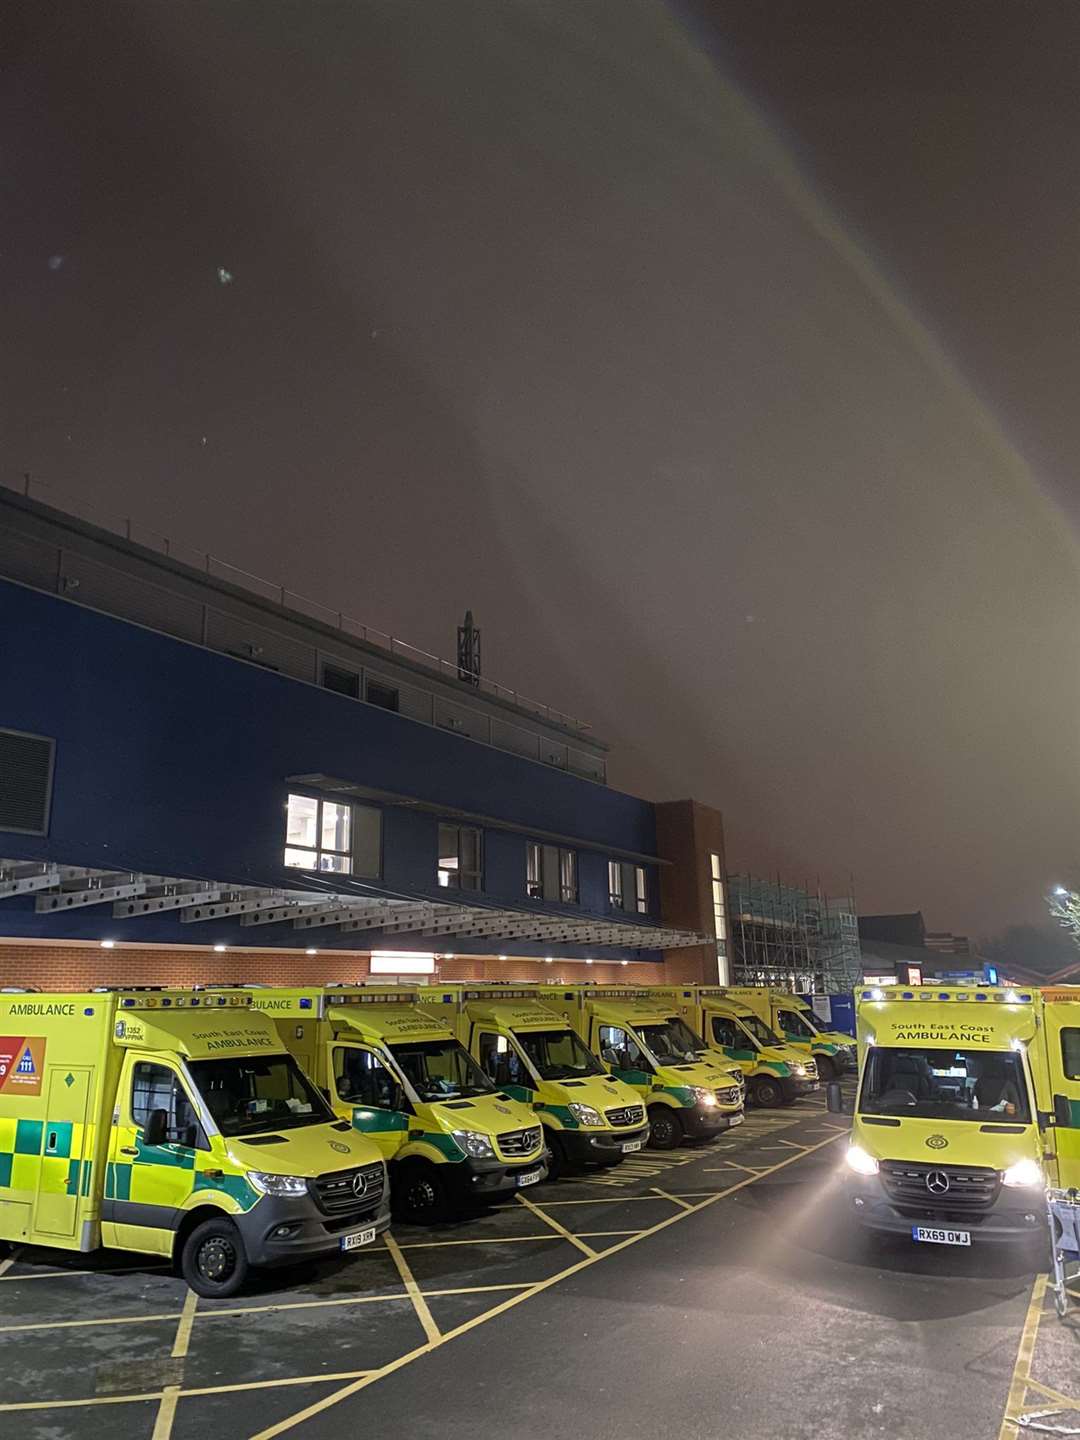 Ambulances waiting outside A&E at Medway hospital, which saw its emergency department issued with a formal warning notice earlier this year. Picture: Cameron Walker